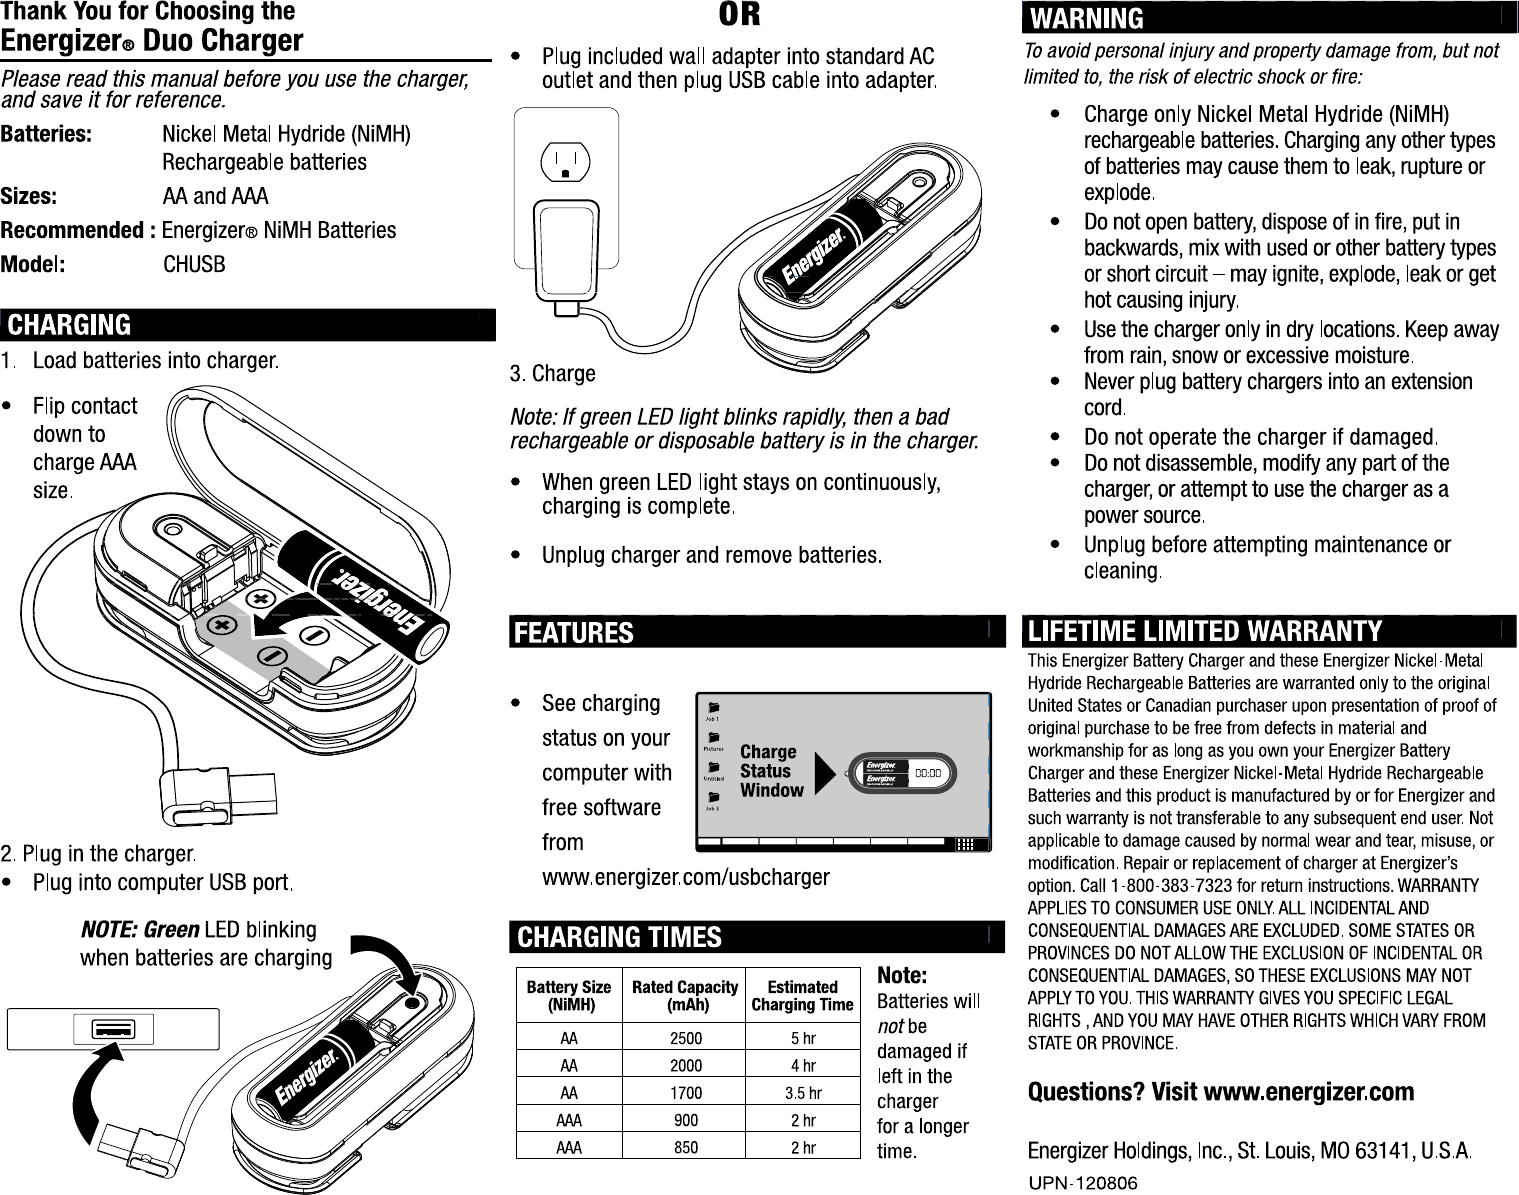 Page 1 of 1 - Energizer Energizer-Energizer-Battery-Charger-Chusb-Users-Manual- Chusb_instructions_English  Energizer-energizer-battery-charger-chusb-users-manual